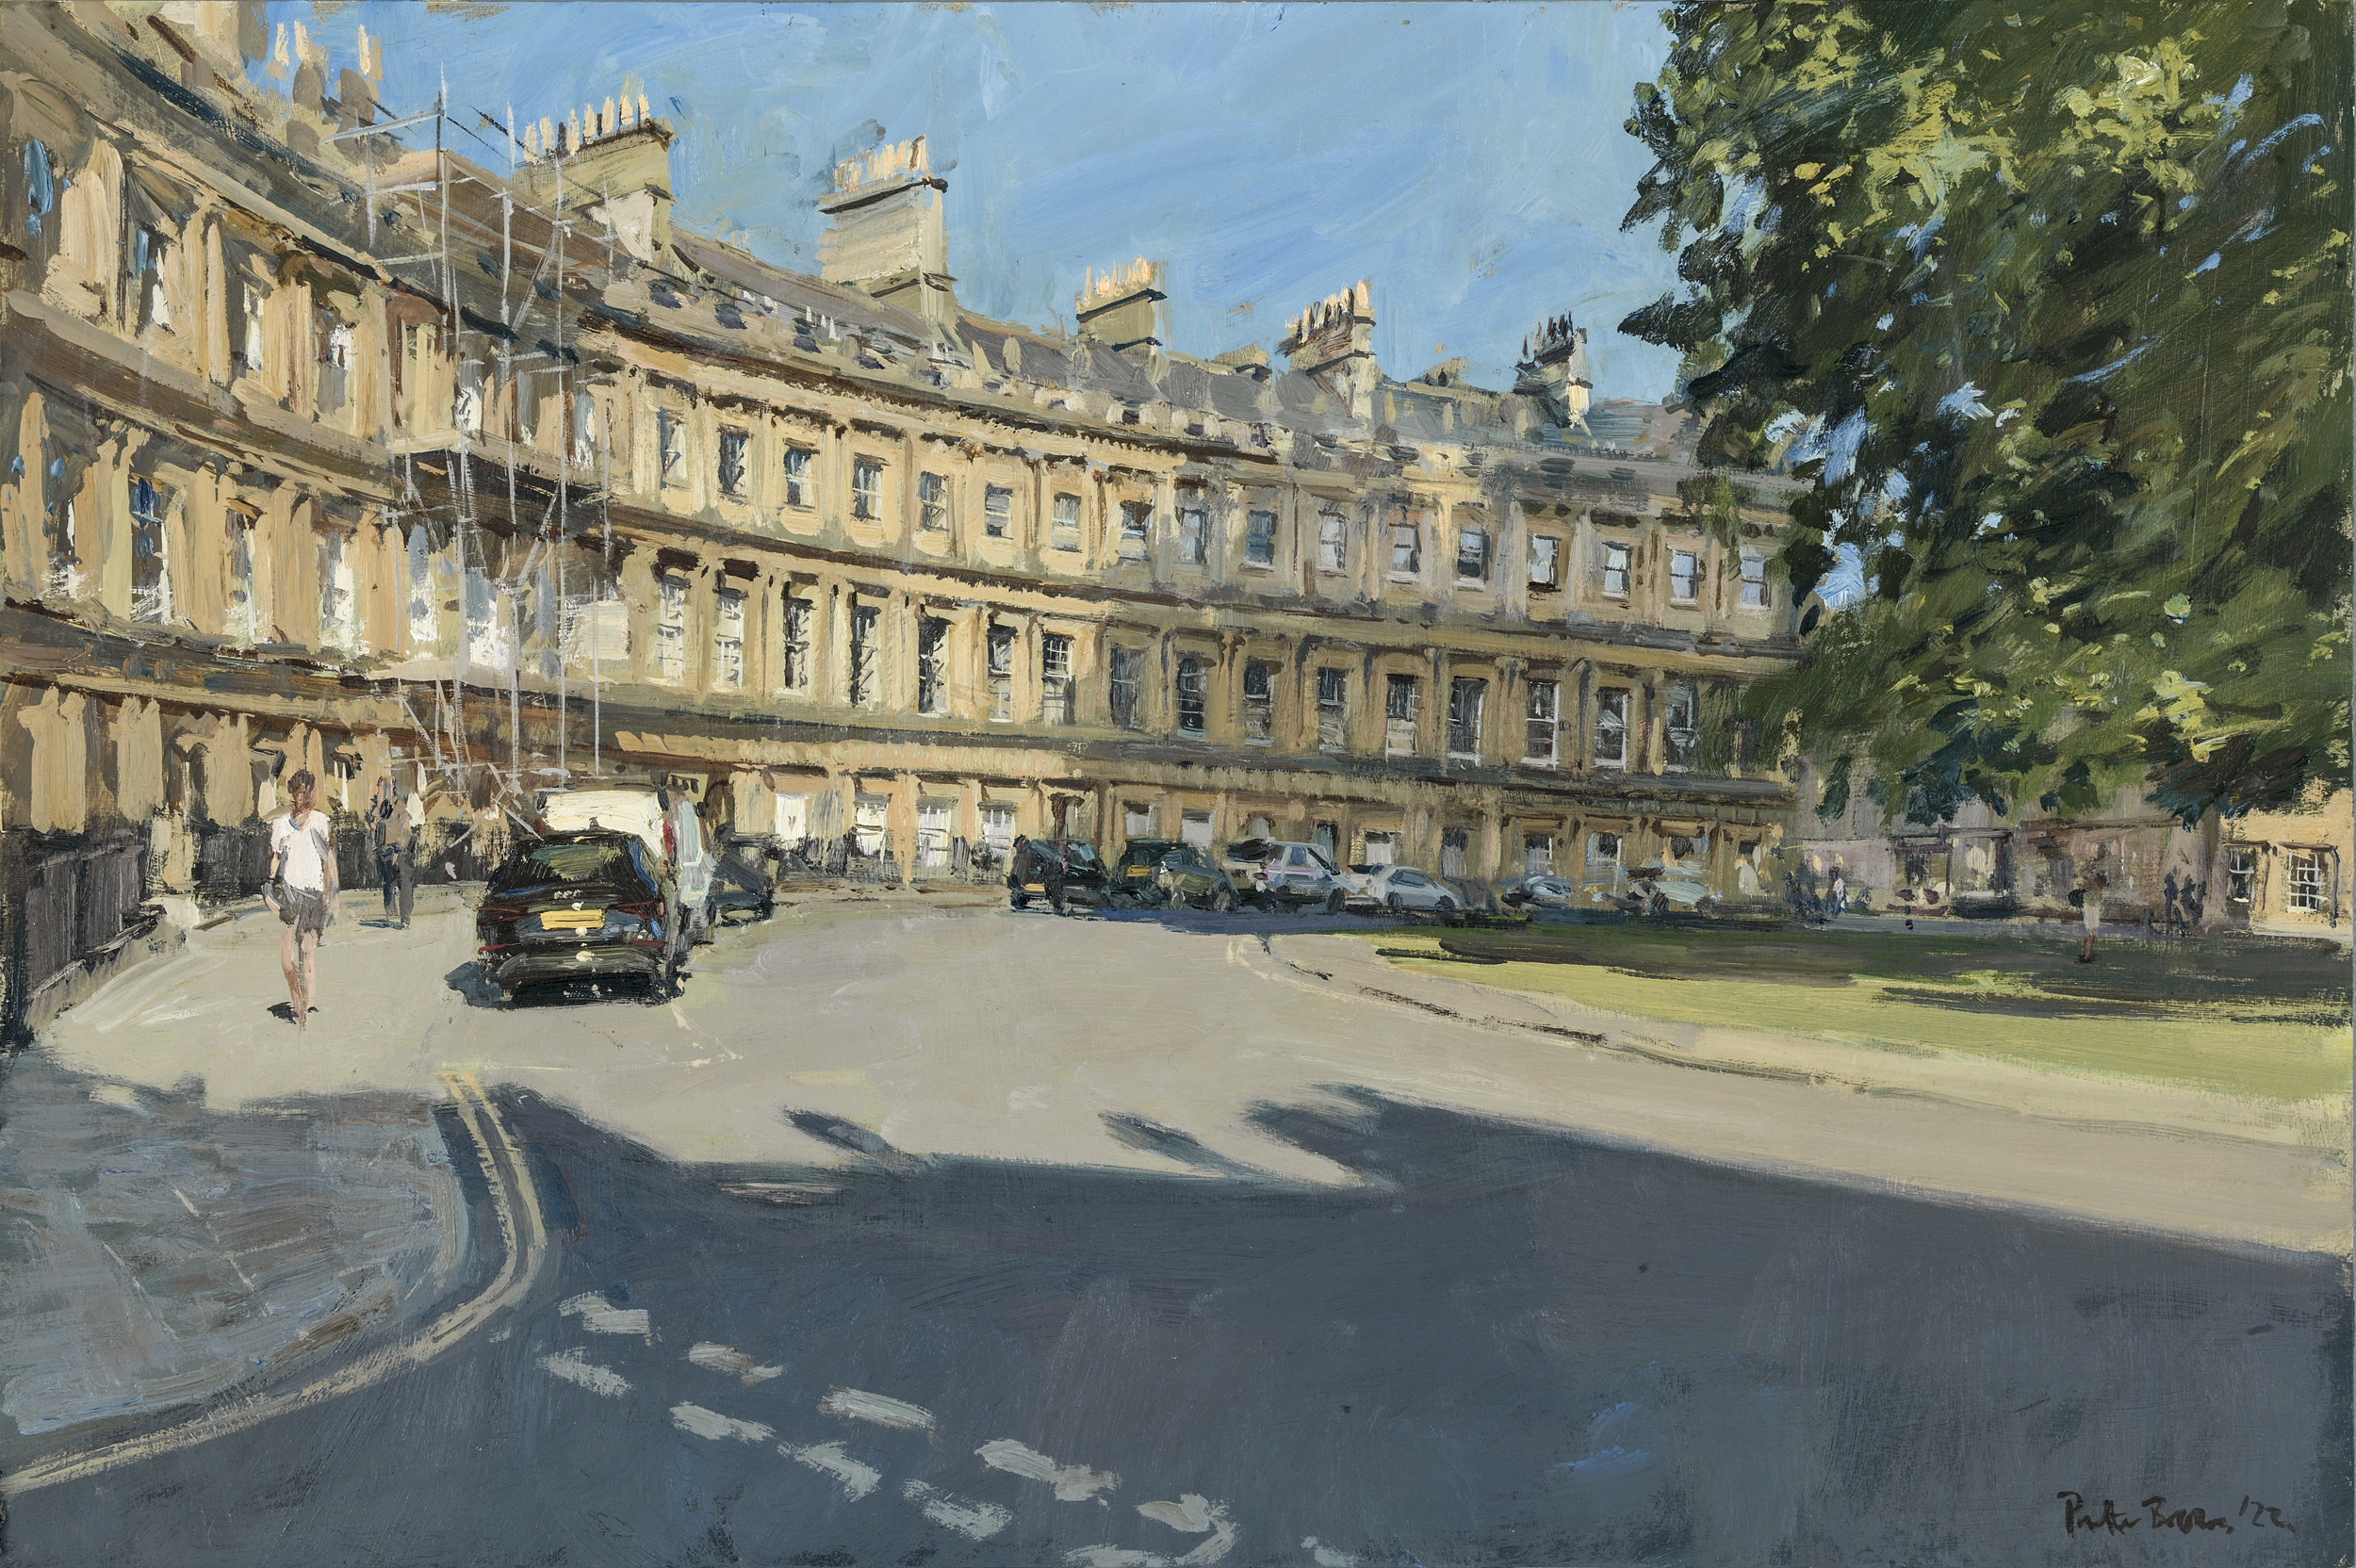 Image: The Circus, Bath early Summer Morning by Peter Brown